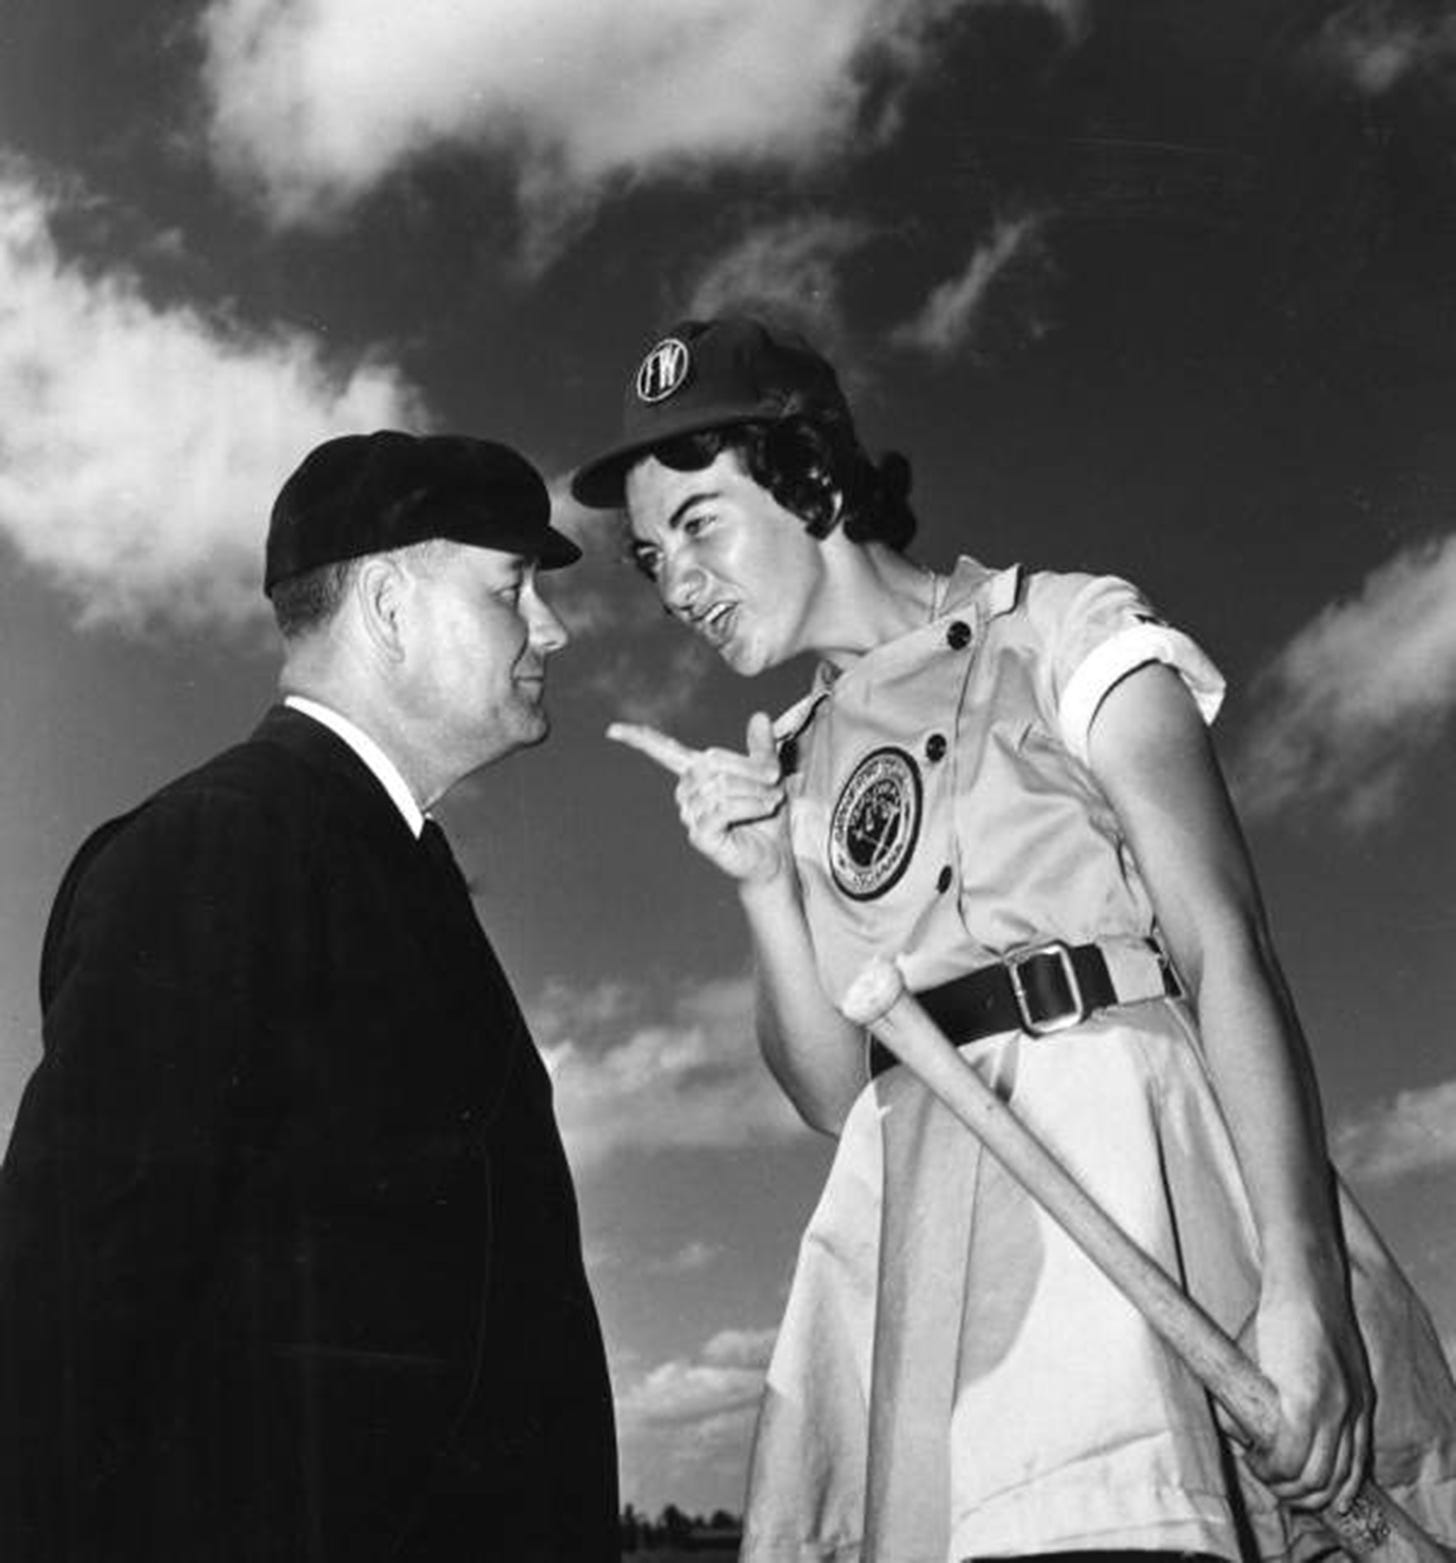 Fort Wayne Daisies player Marie Wegman arguing with umpire Norris Ward, 1948. (Photo courtesy State Archives of Florida)